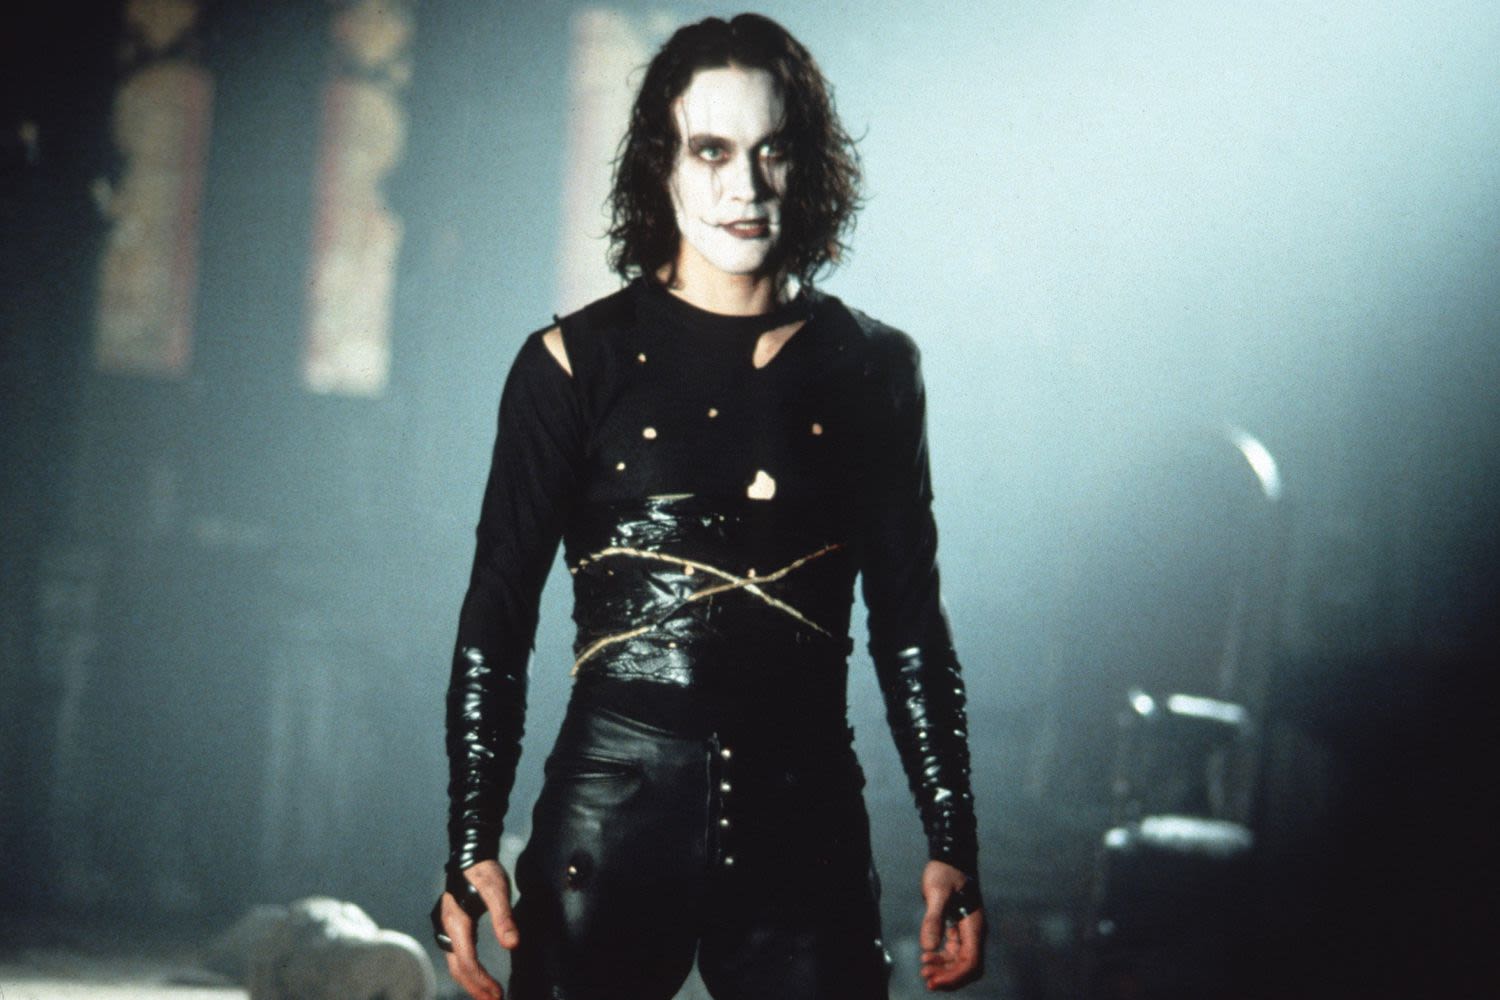 'The Crow' 30th Anniversary: All About the Shocking On-Set Death of Star Brandon Lee at Age 28